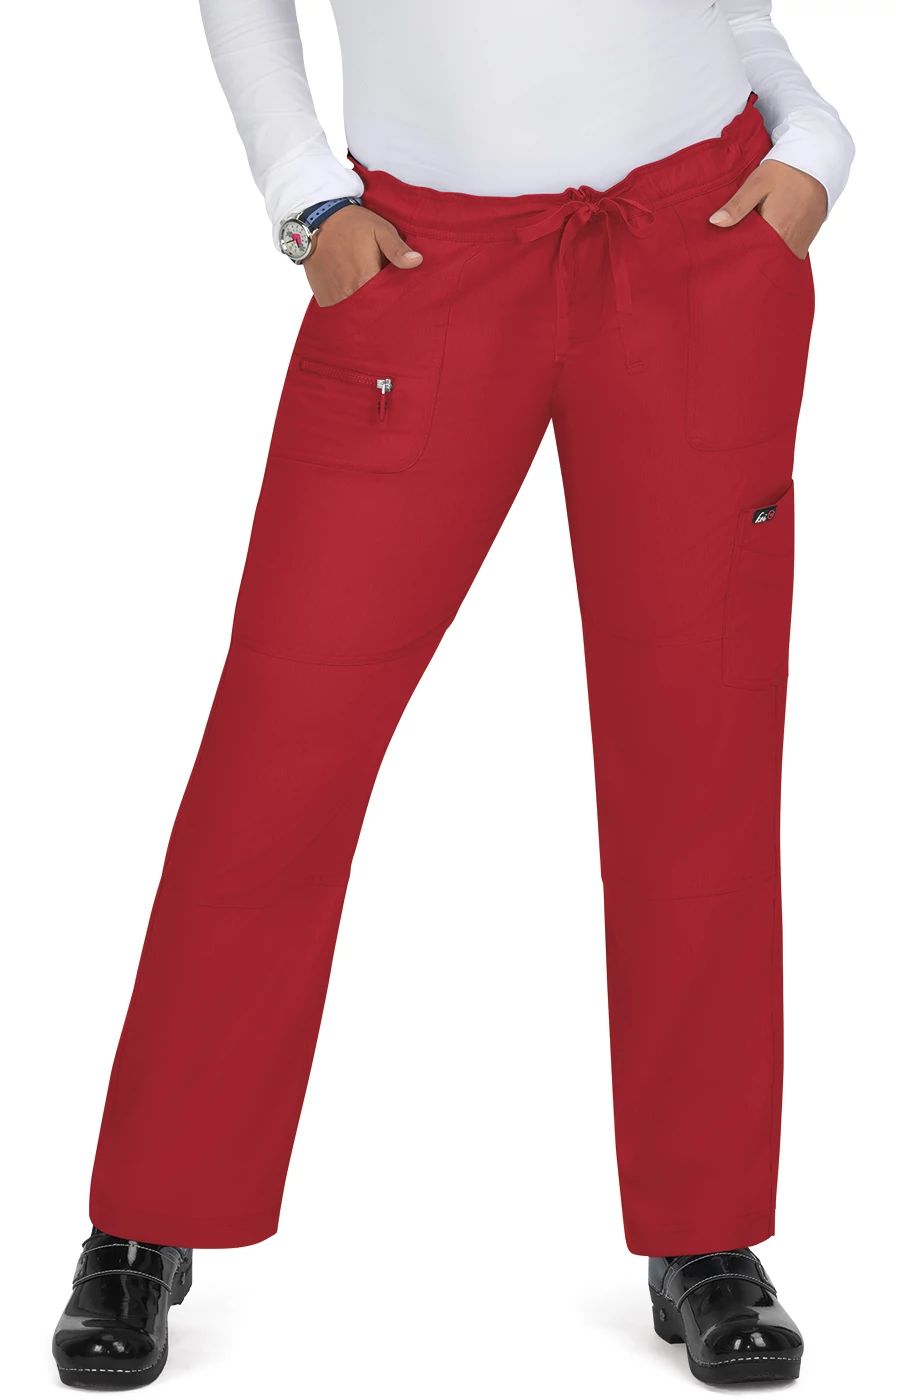 Women's Grey Golf Pants with Welt Pockets - Stylish and Comfortable |  Sportsqvest